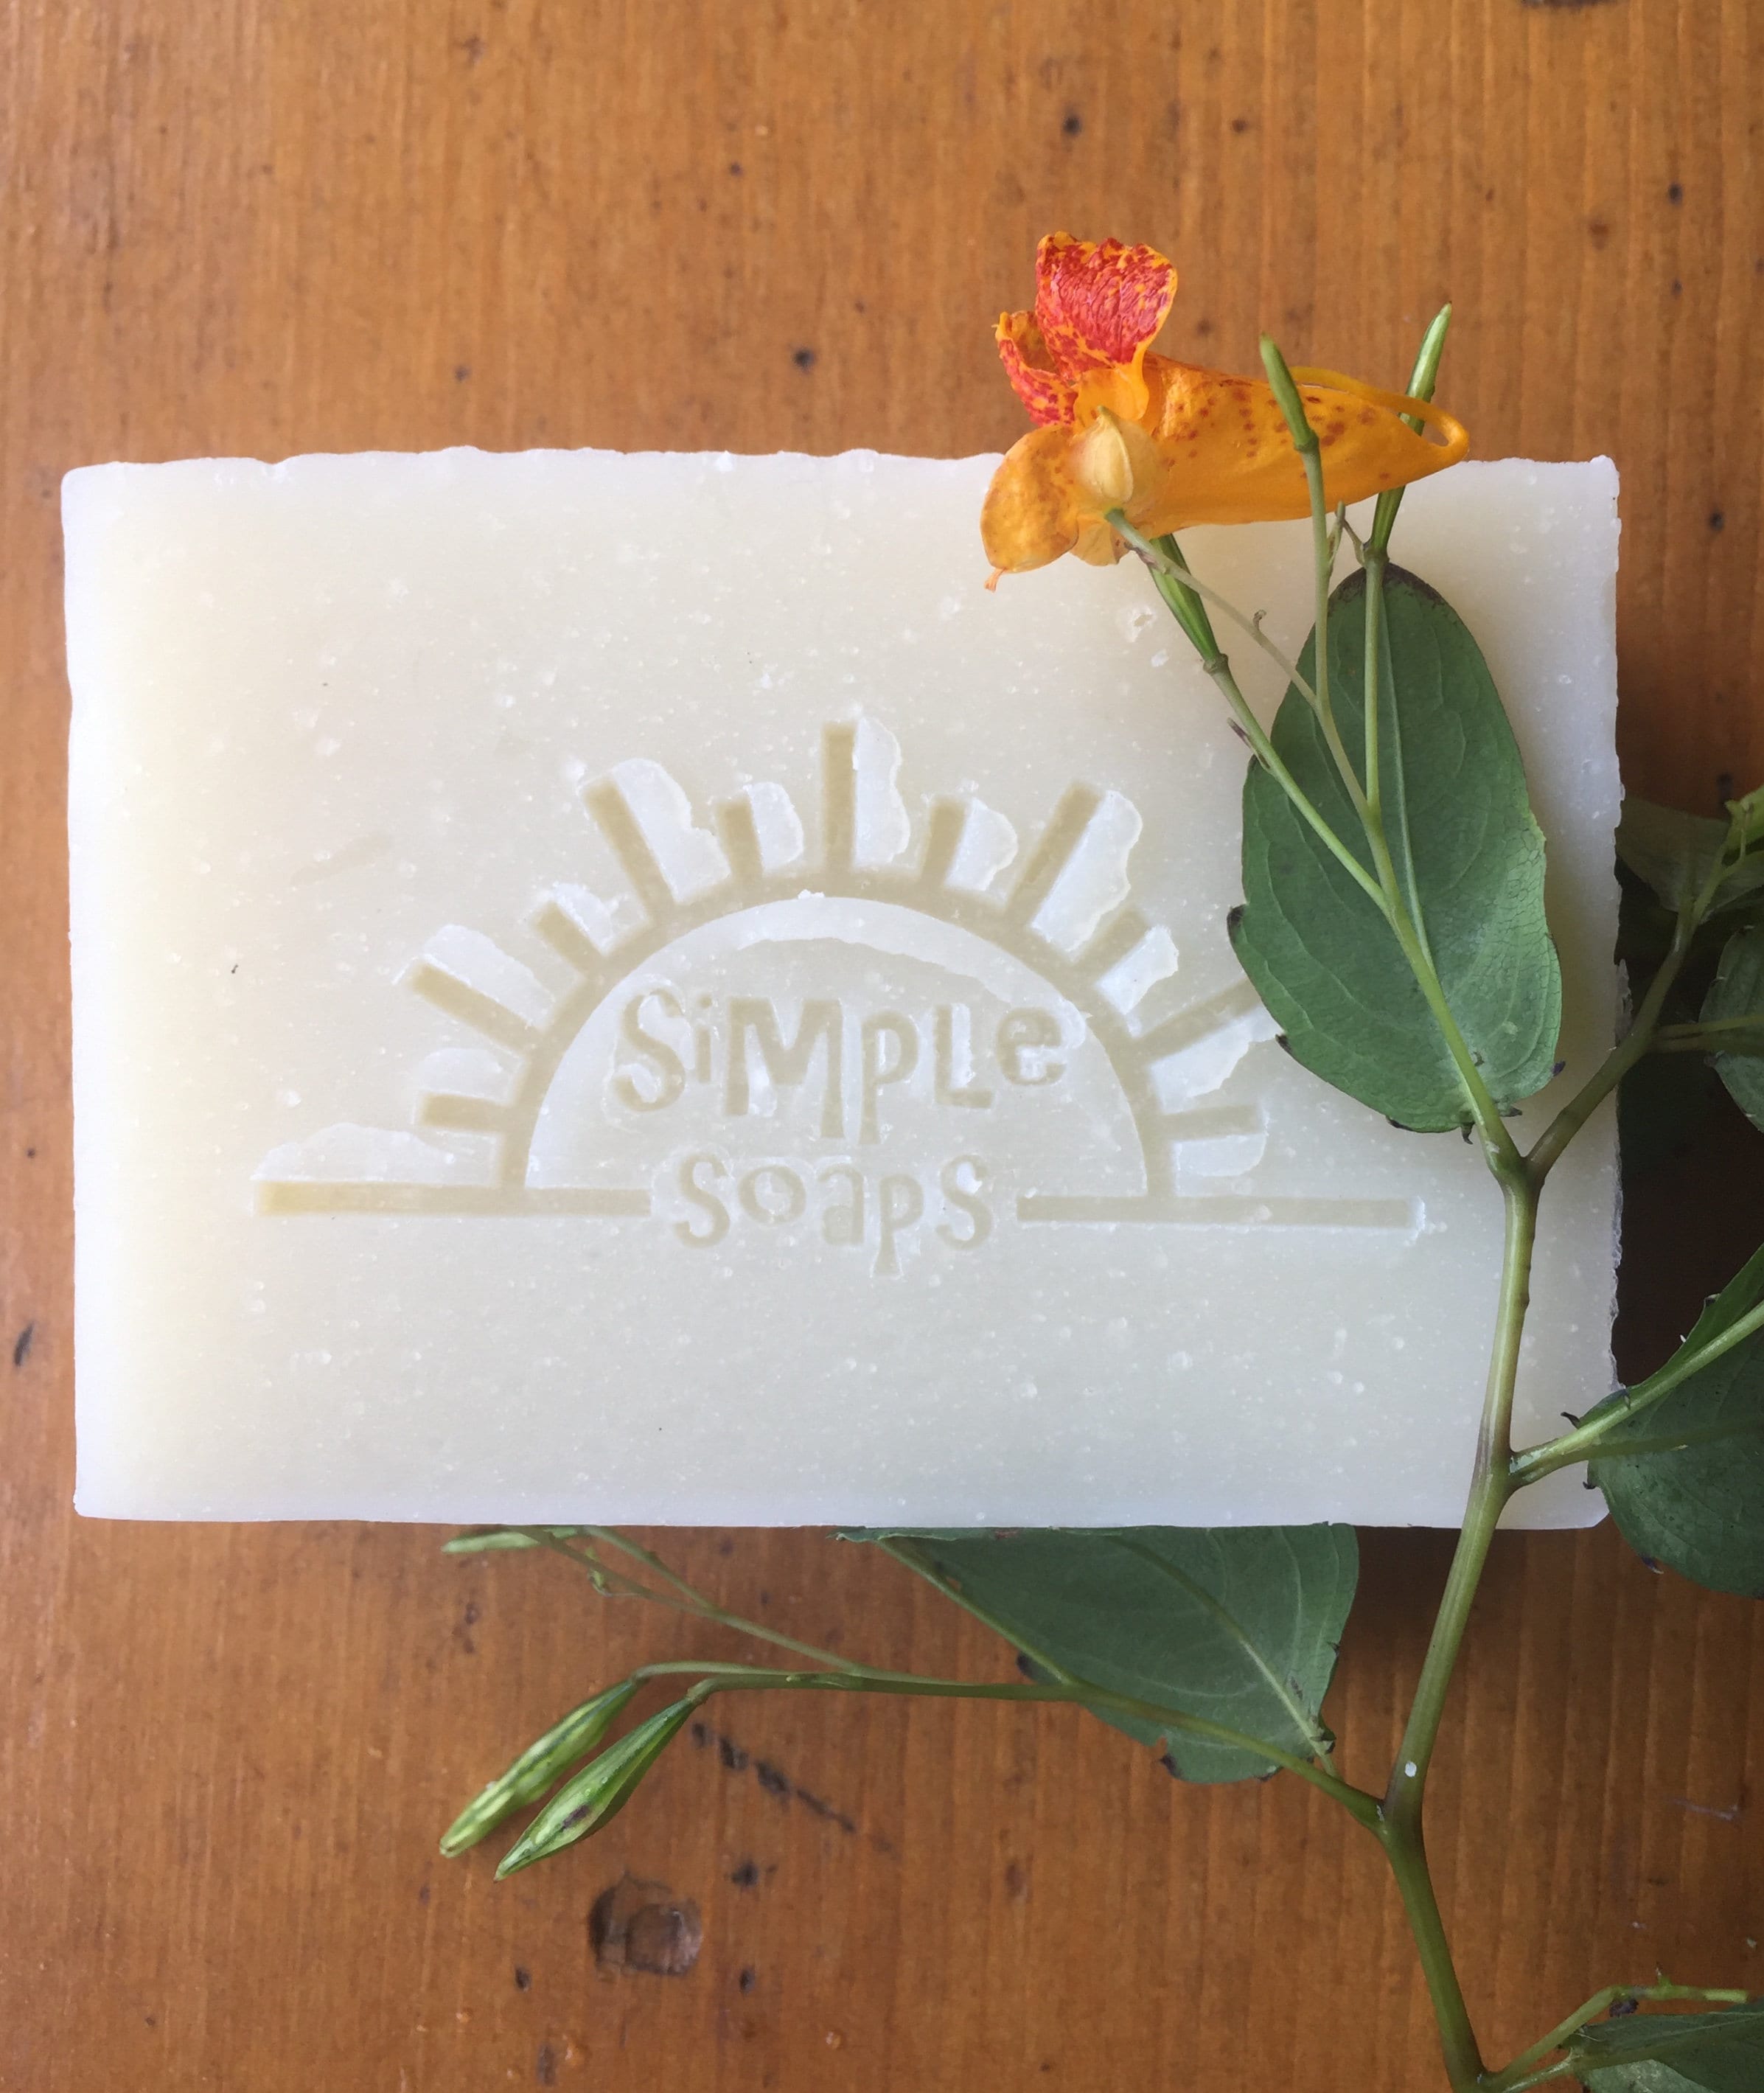 Old Fashioned Lye Soap with Jewel Weed (for Poison Ivy)